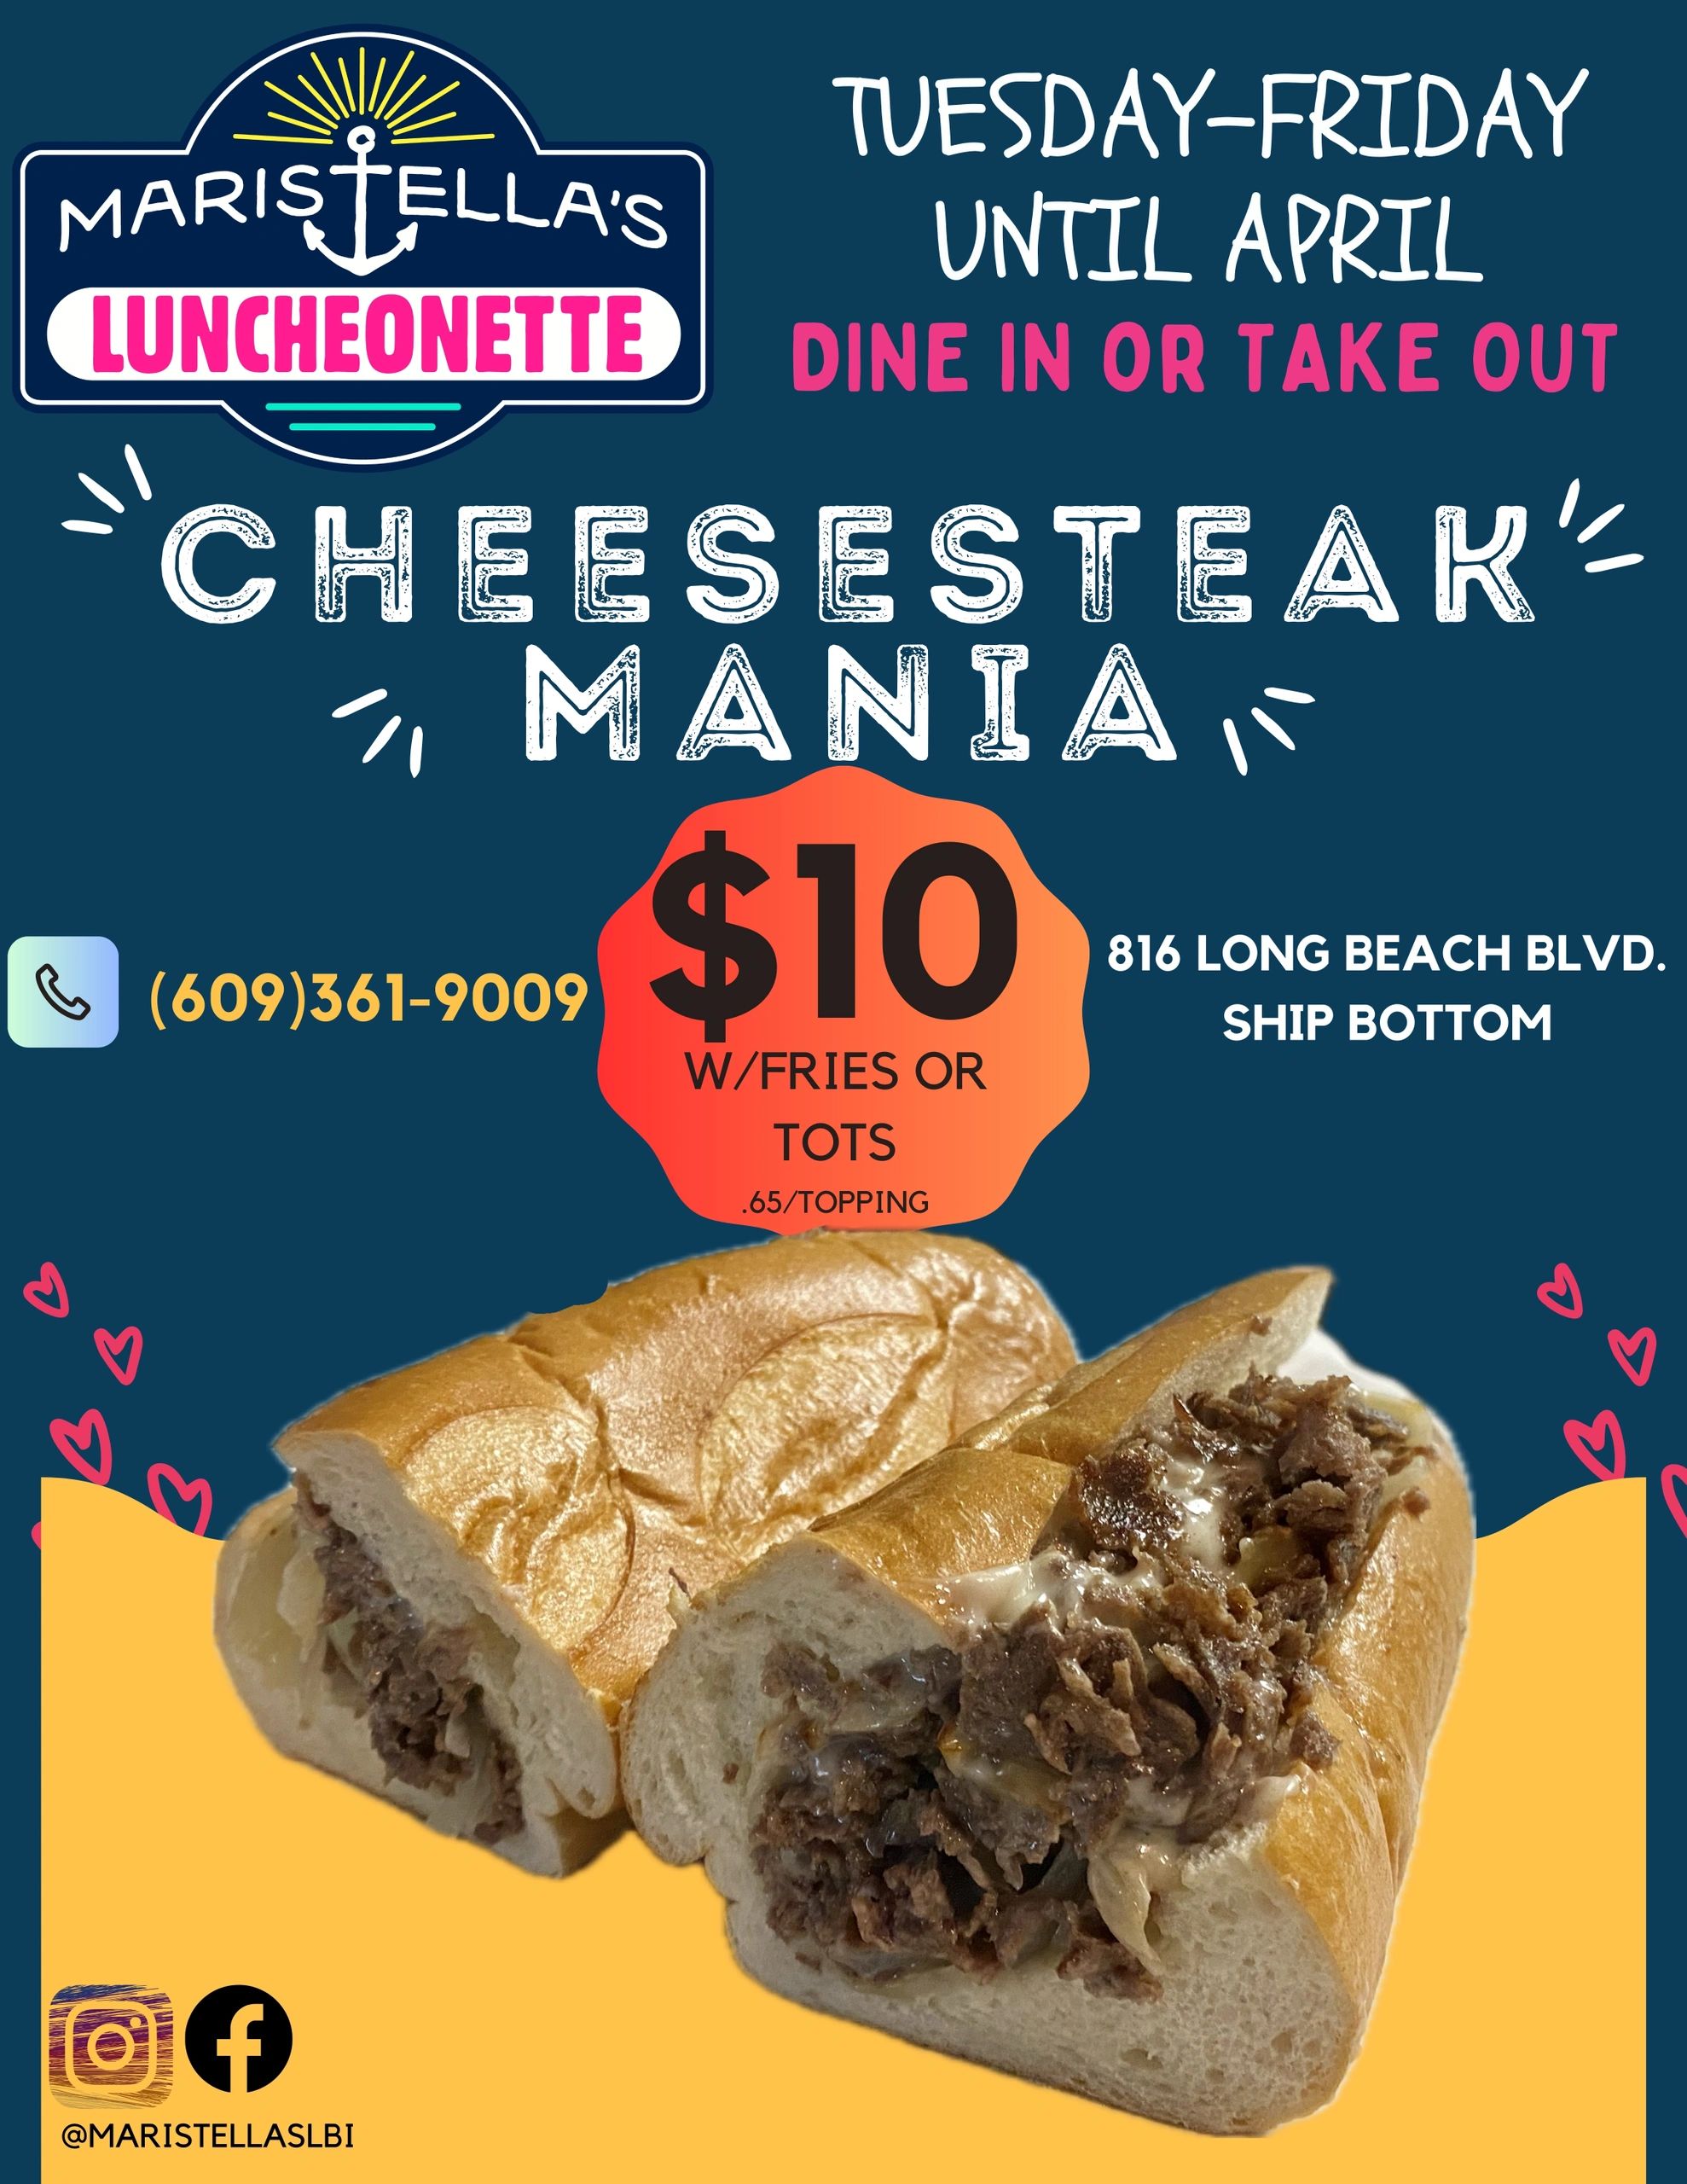 Cheese steak mania promotional flyer